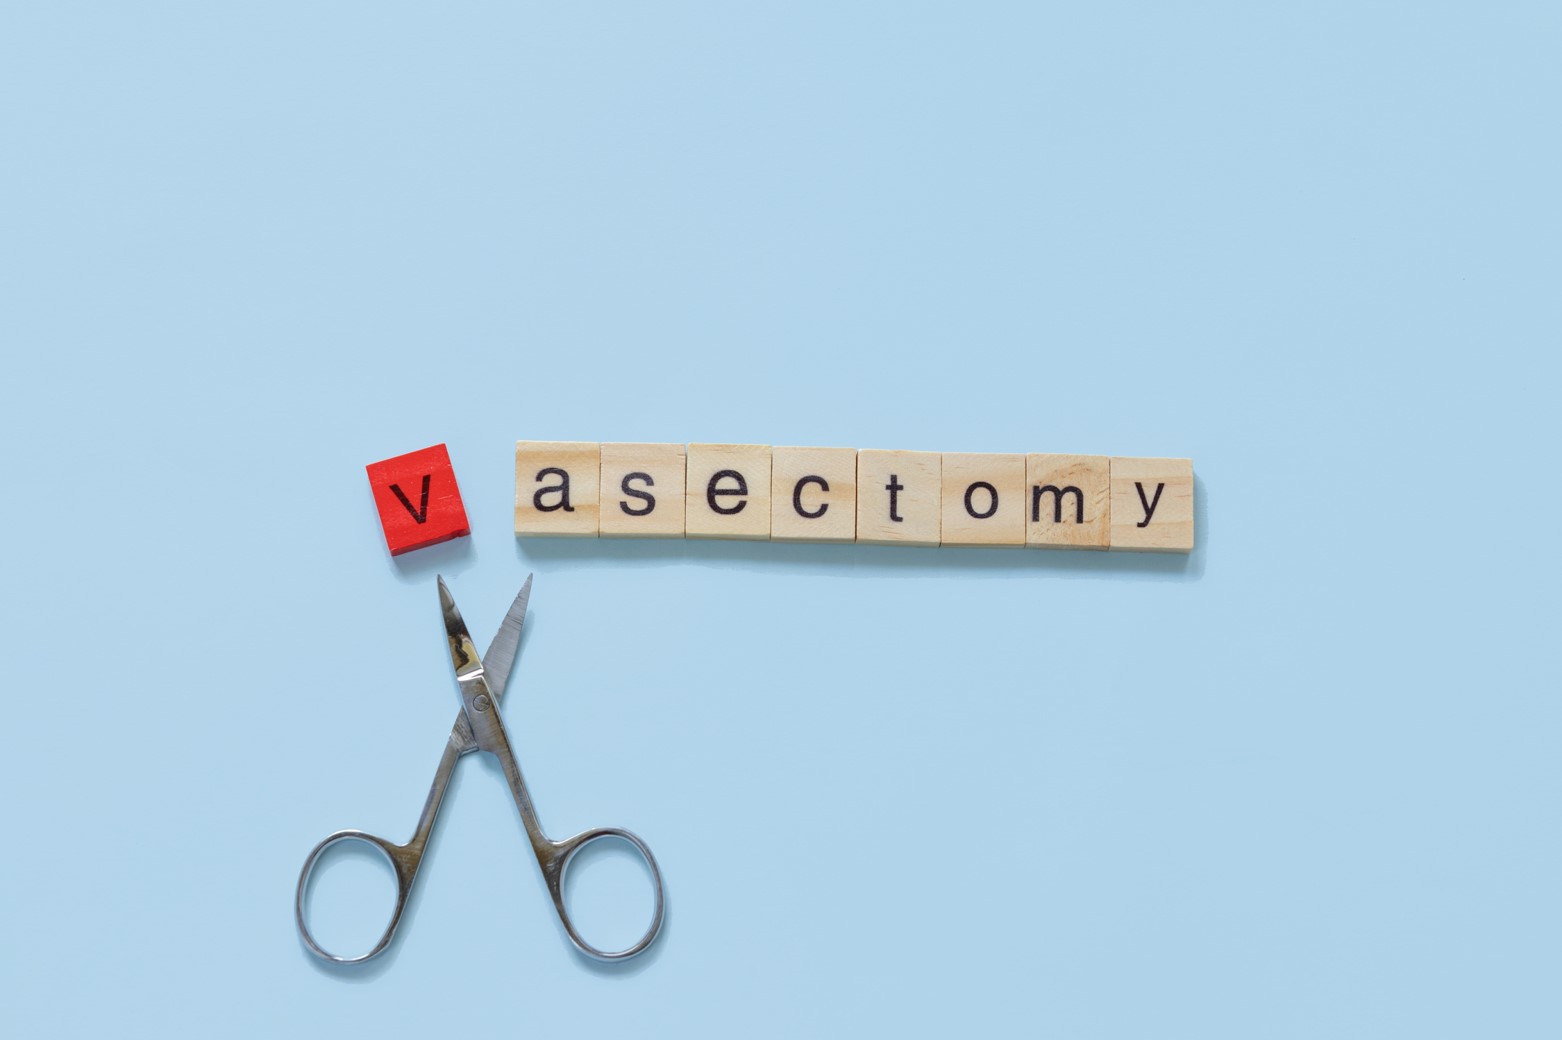 Photo of scrabble tiles spelling 'vasectomy' with a pair of scissors